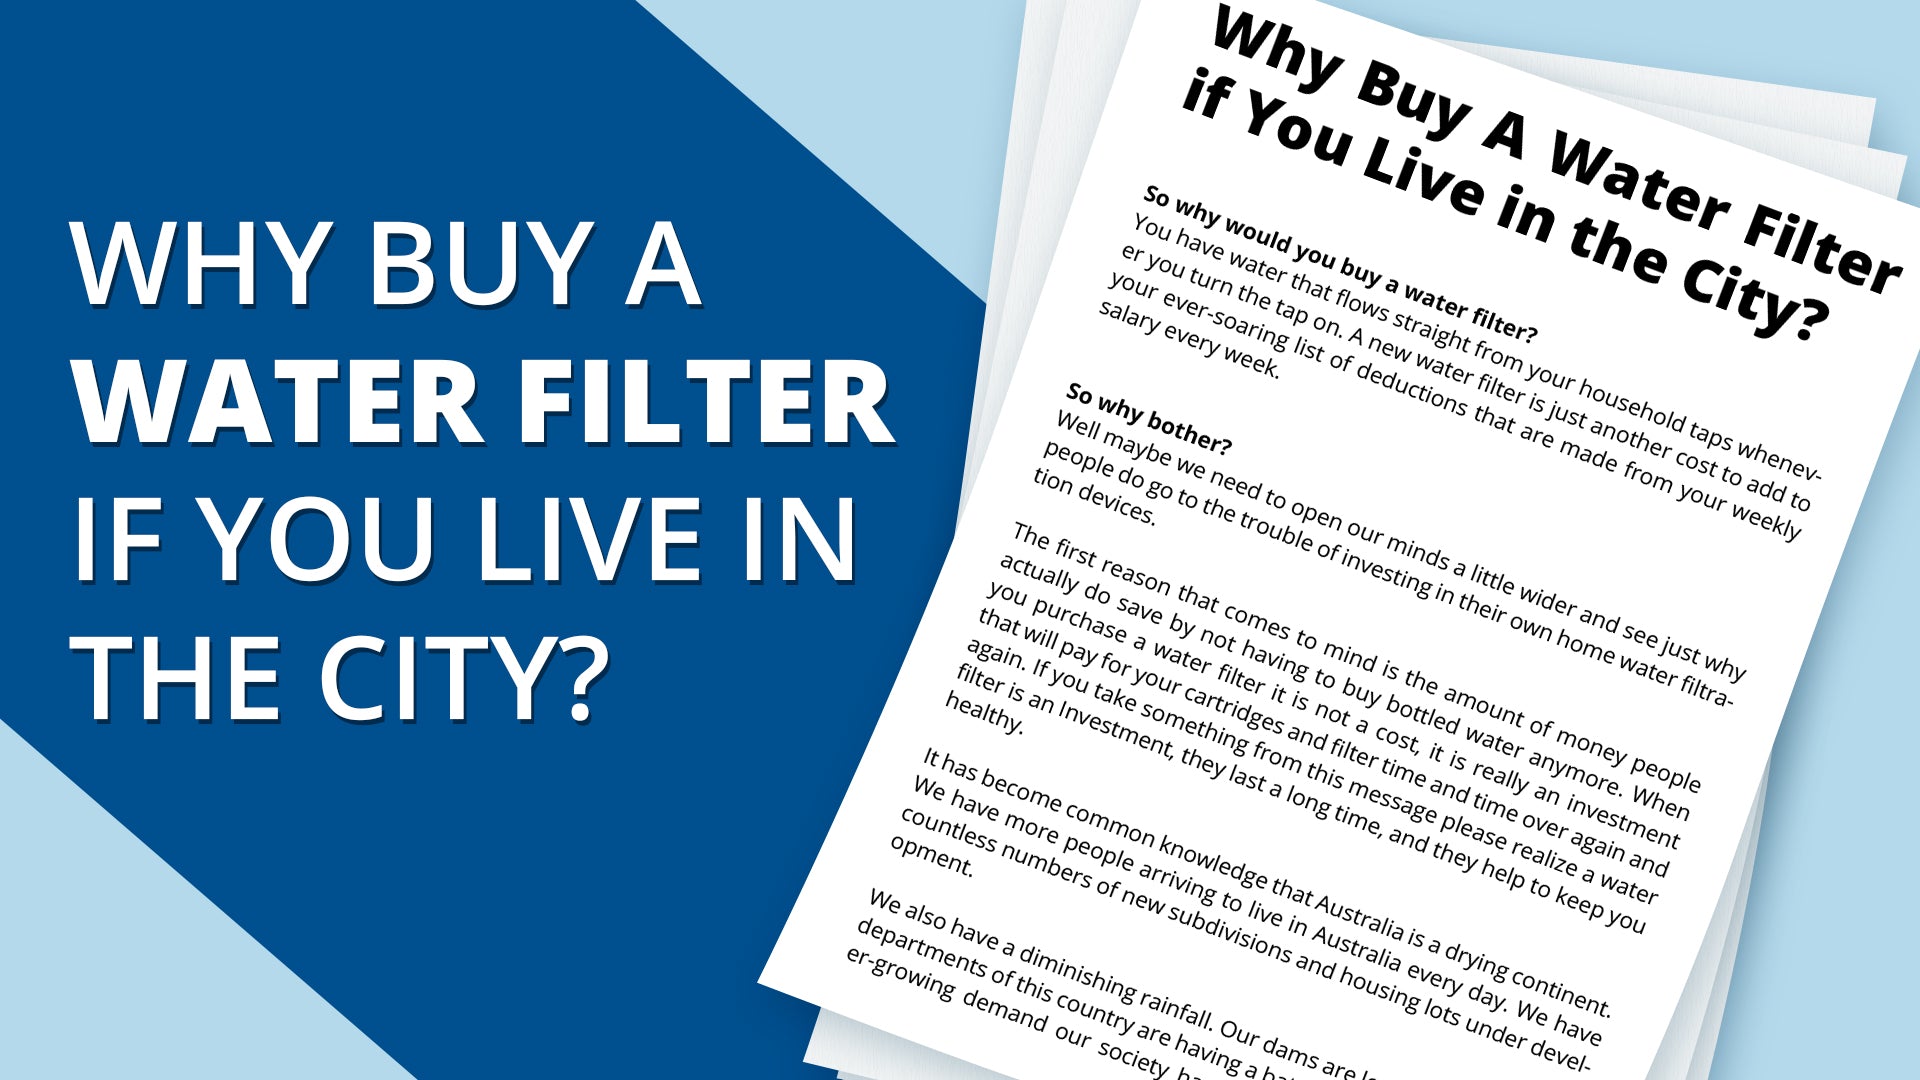 Why Buy A Water Filter if you live in the city?